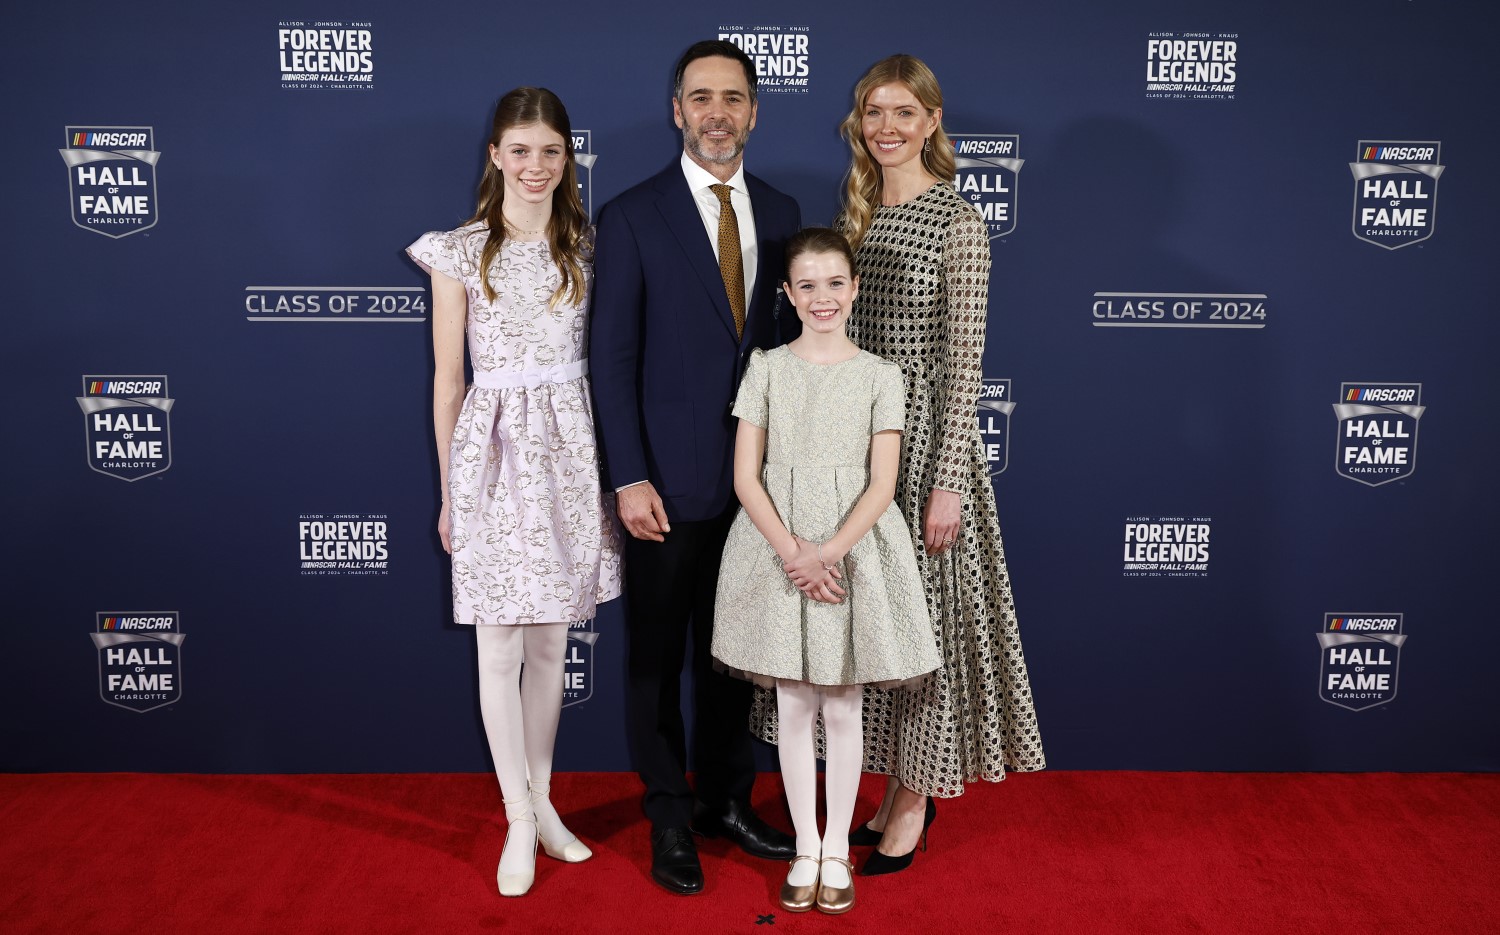 NASCAR Hall of Fame inductee Jimmie Johnson, daughters Genevieve Johnson, Lydia Norriss Johnson and wife, Chandra Johnson pose for photos on the red carpet prior to the 2024 NASCAR Hall of Fame Induction Ceremony at Charlotte Convention Center on January 19, 2024 in Charlotte, North Carolina. (Photo by Chris Graythen/Getty Images)